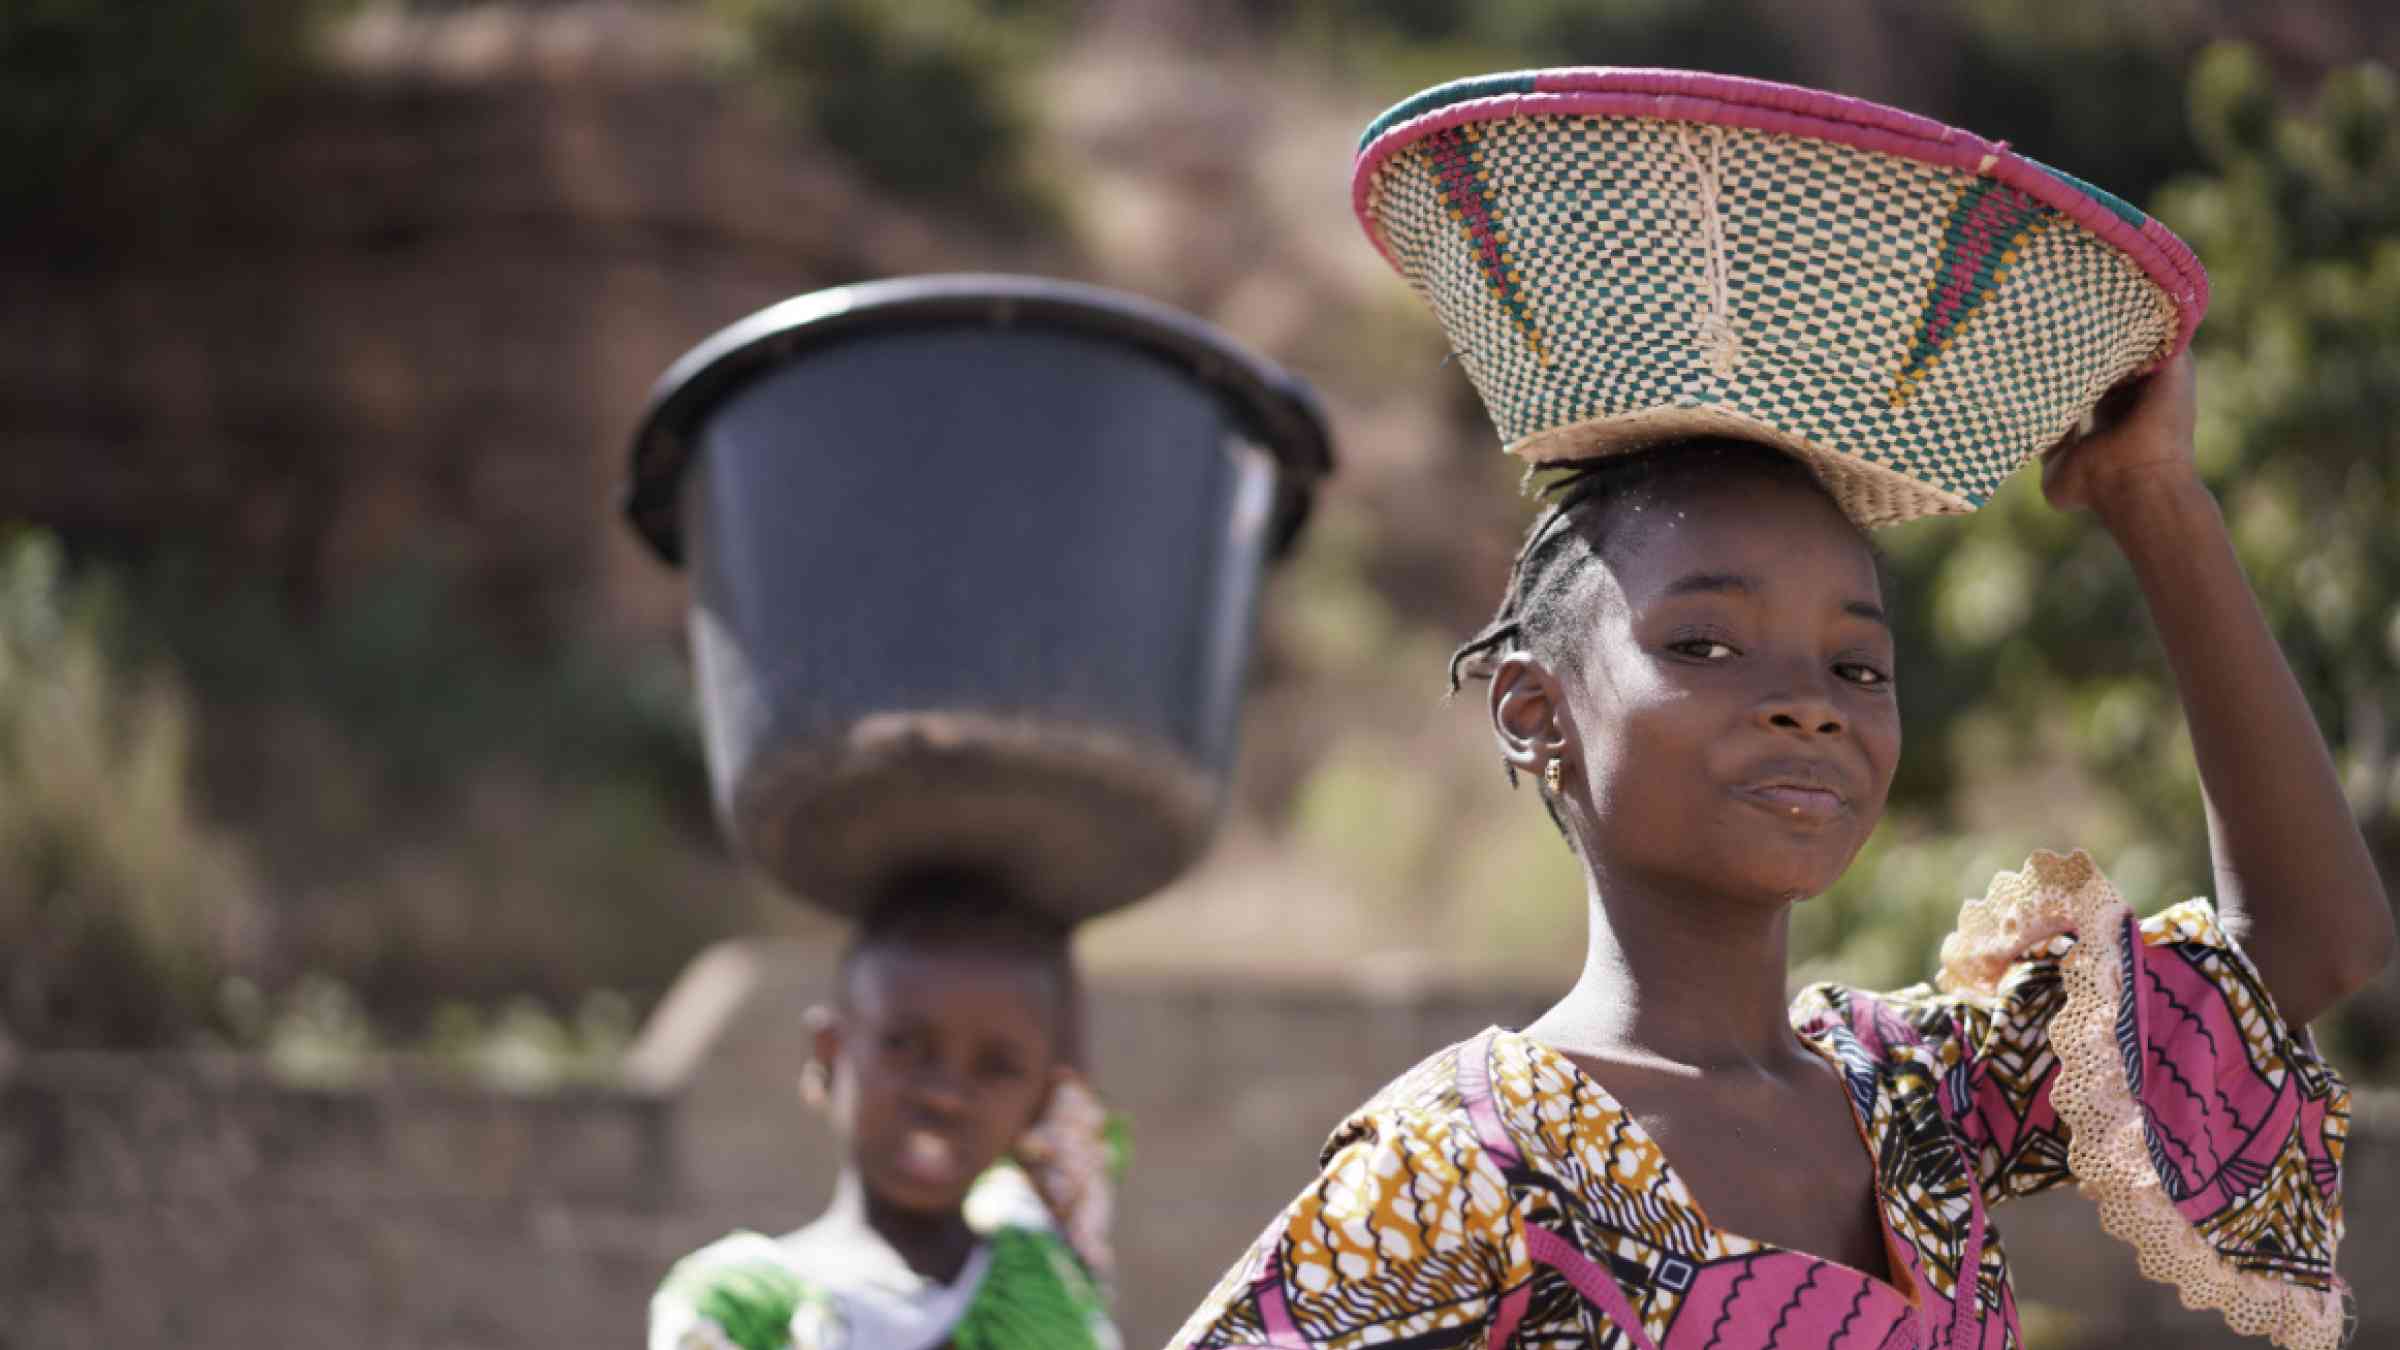 Two proud African girls carrying heavy household items on their head